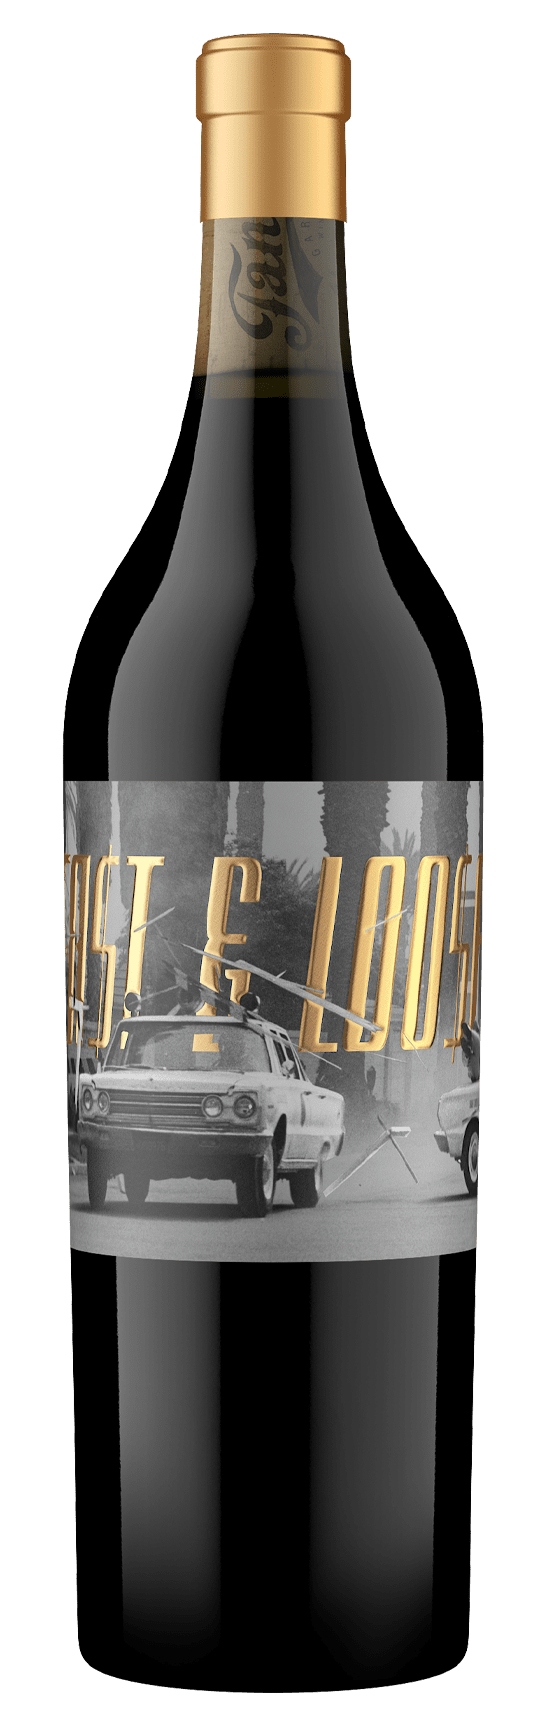 2018 Fast & Loose, Red Wine, California